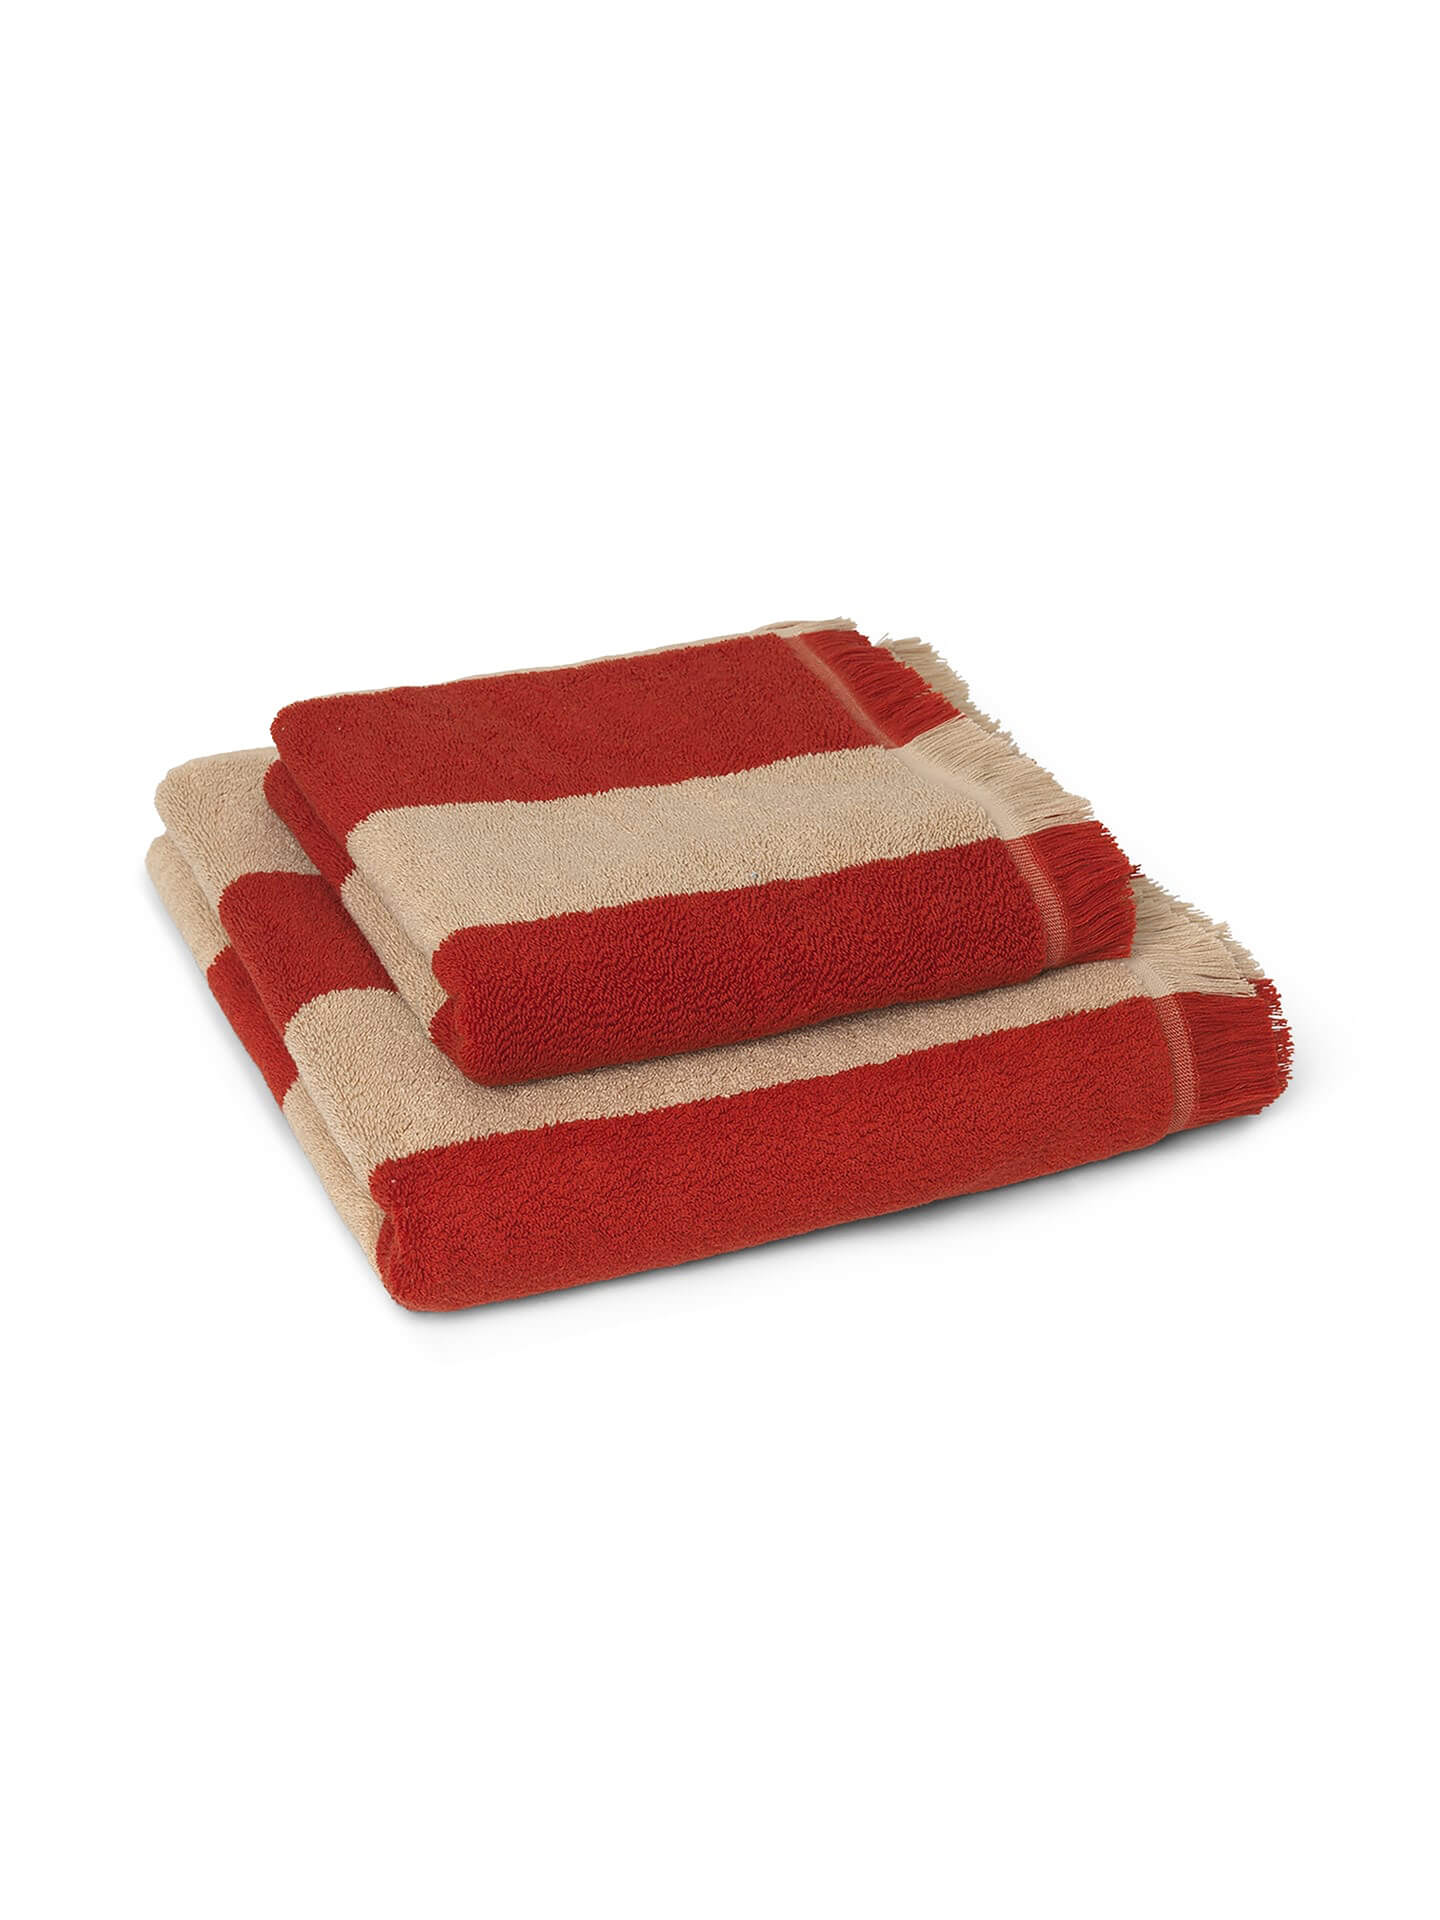 Alee Hand Towel | Camel & Red | Cotton | by ferm Living - Lifestory - ferm LIVING